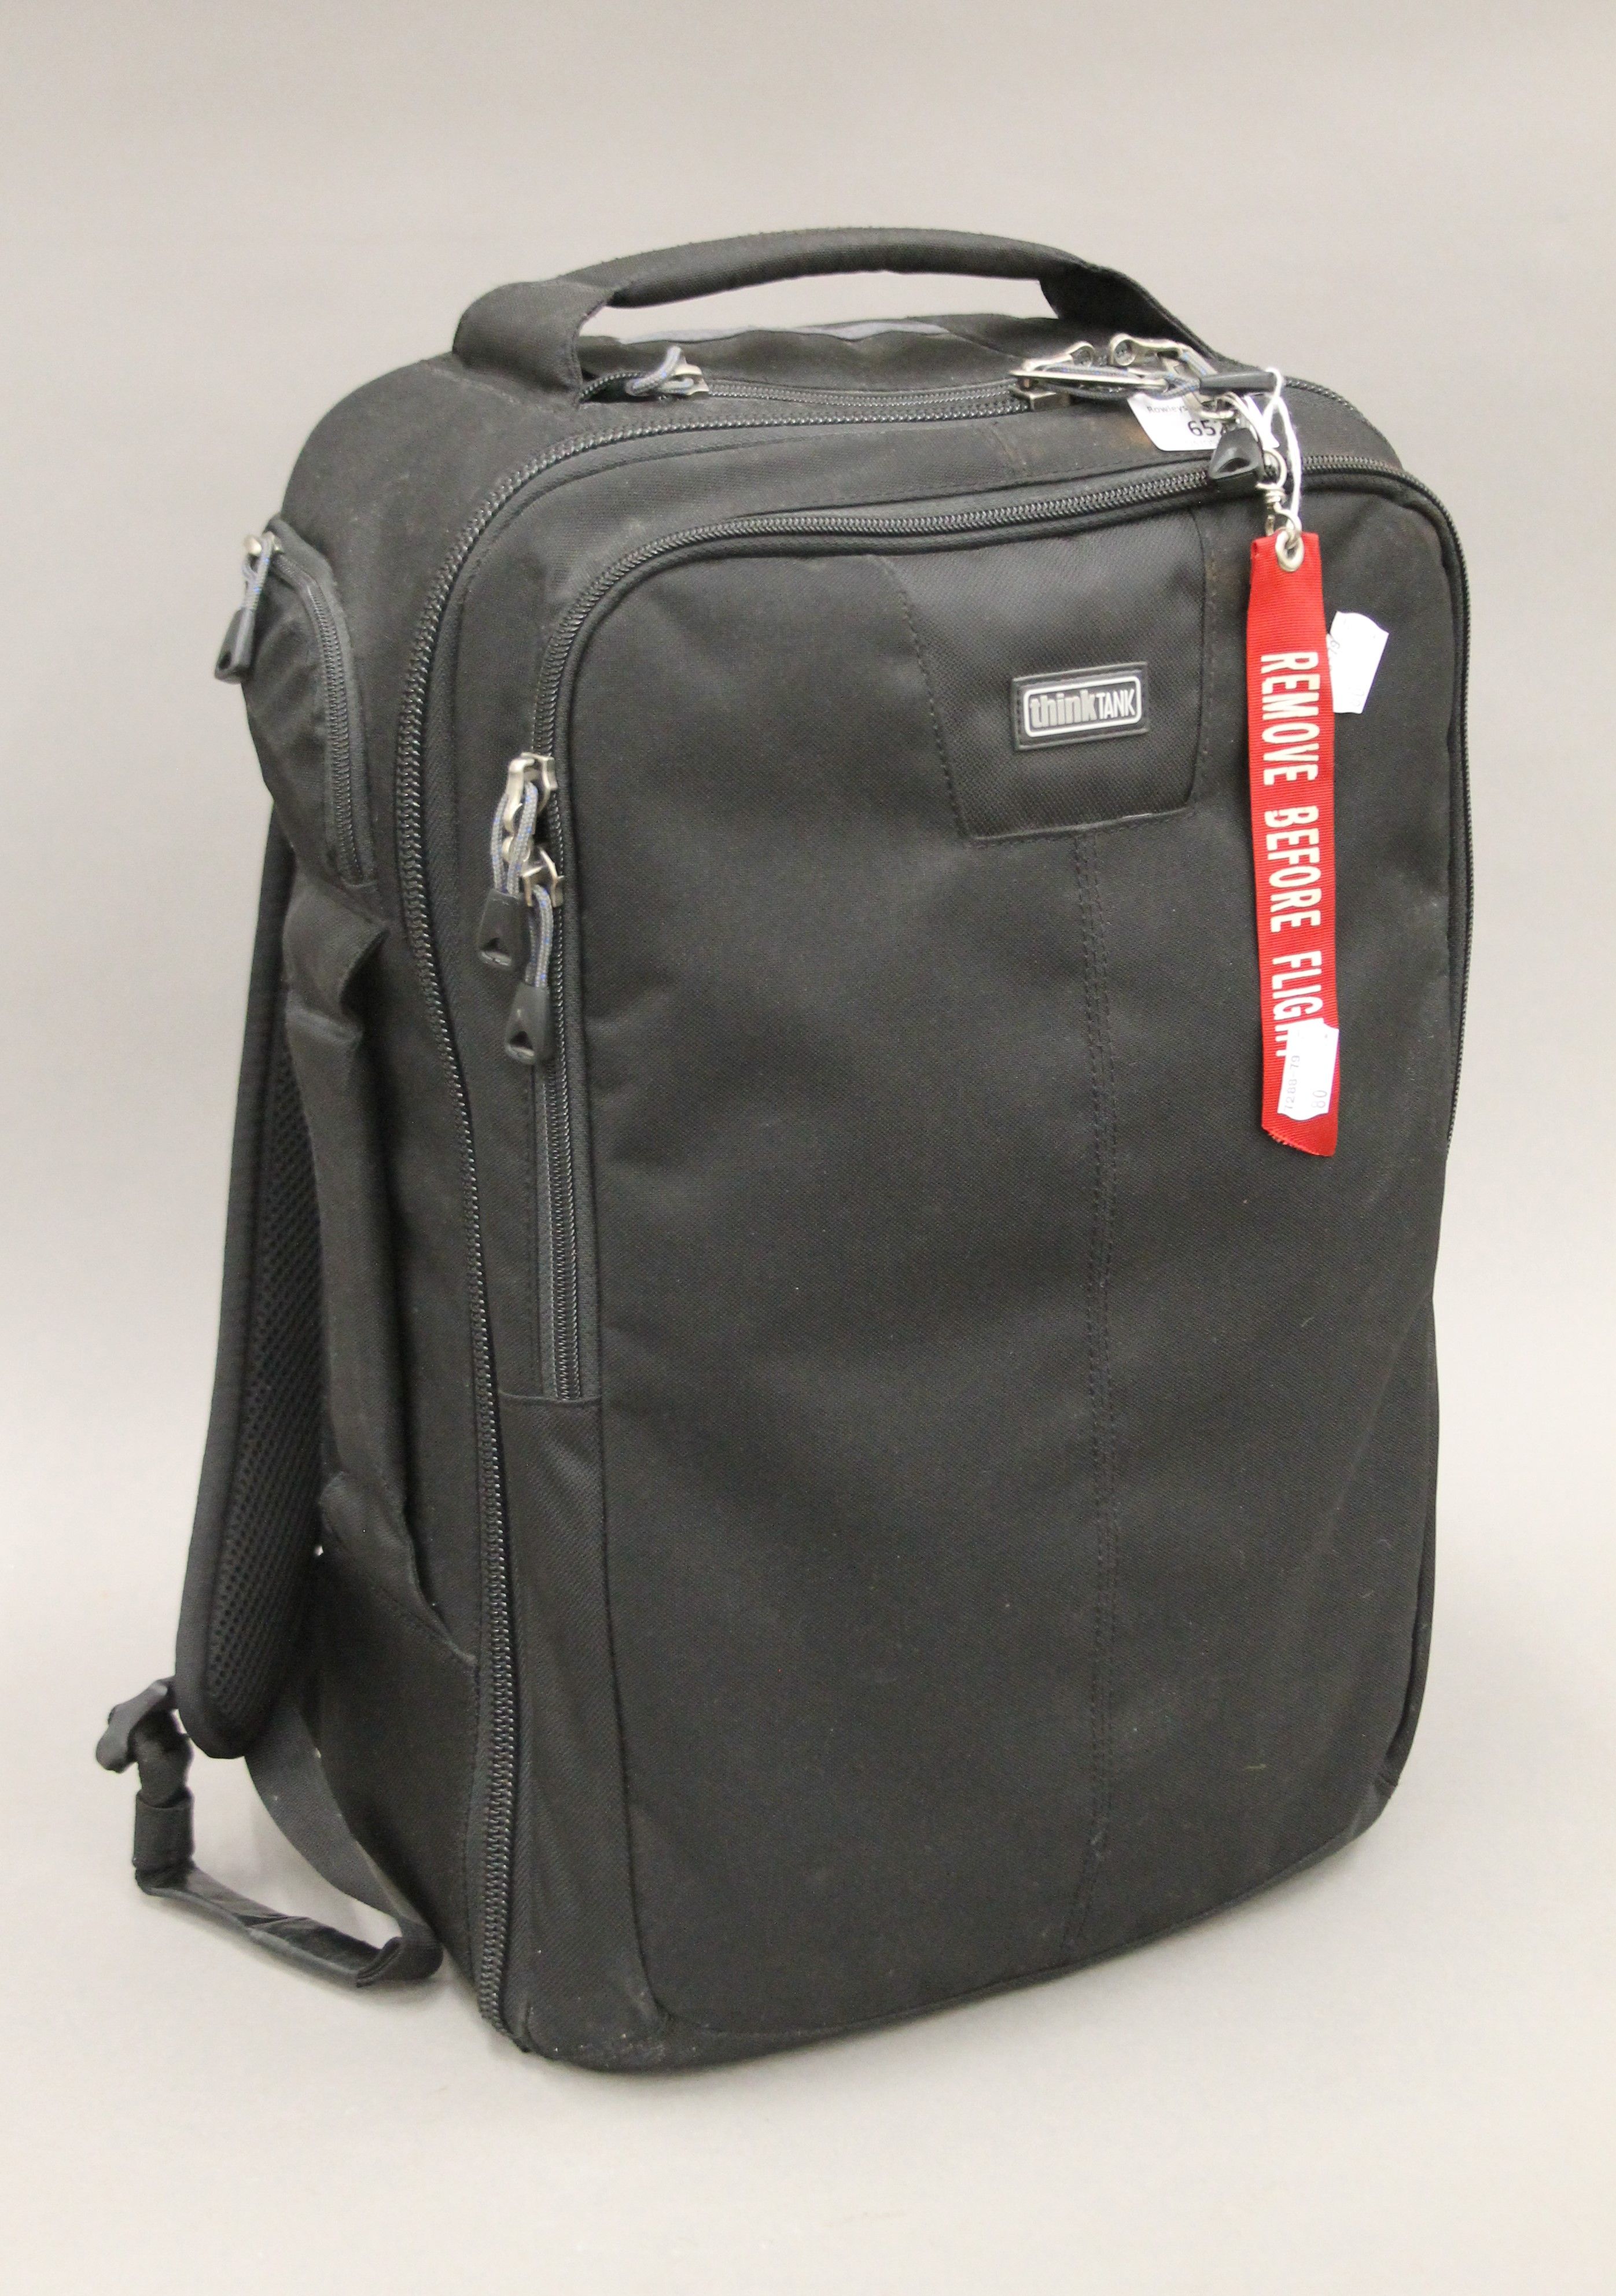 A quantity of Nikon camera equipment etc. in a carrying case. The case 46 cm high. - Image 9 of 14